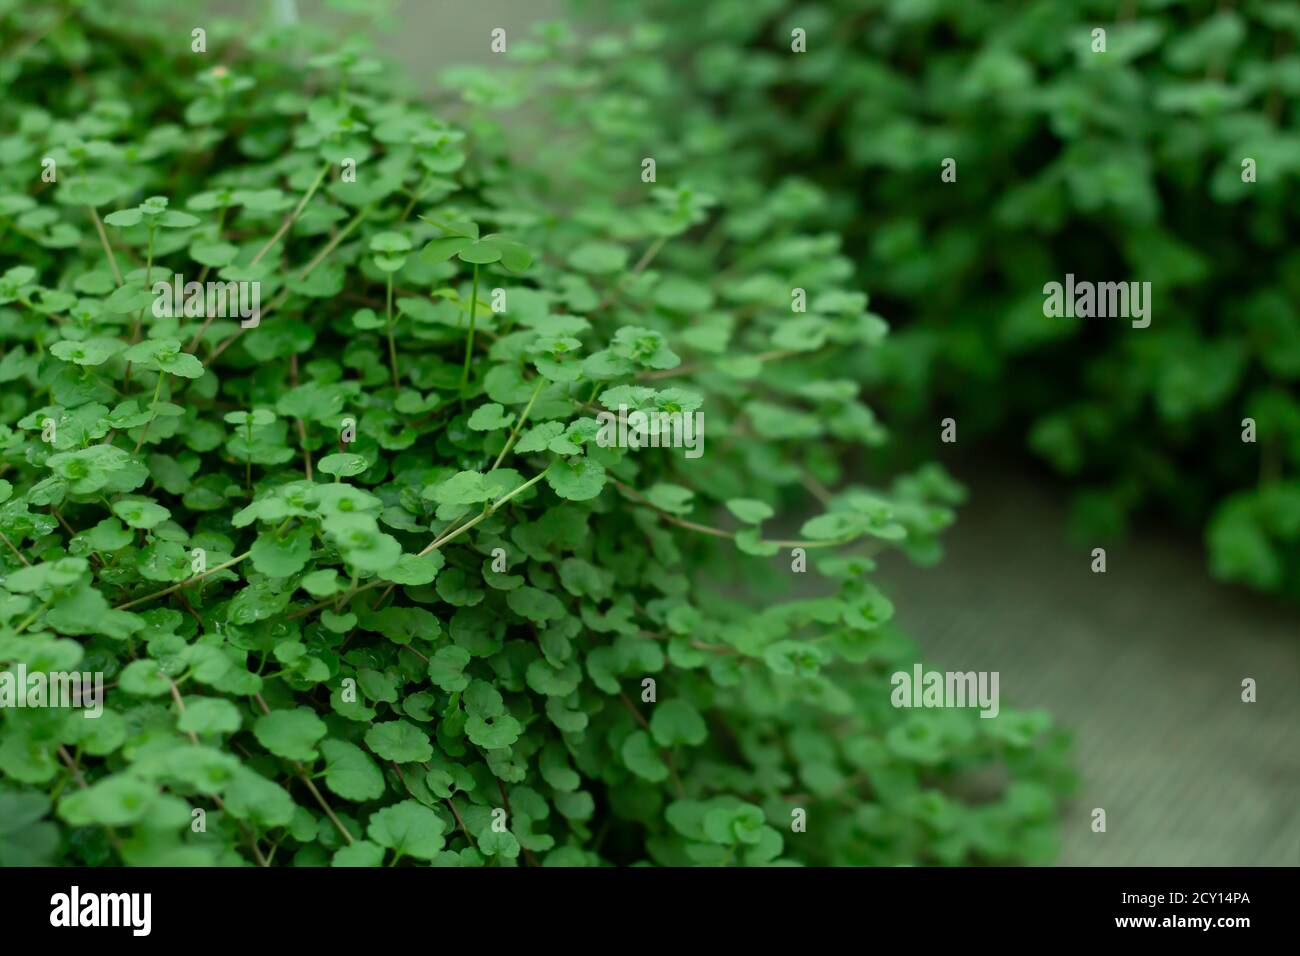 Natural green backdrop of green leaves Stock Photo